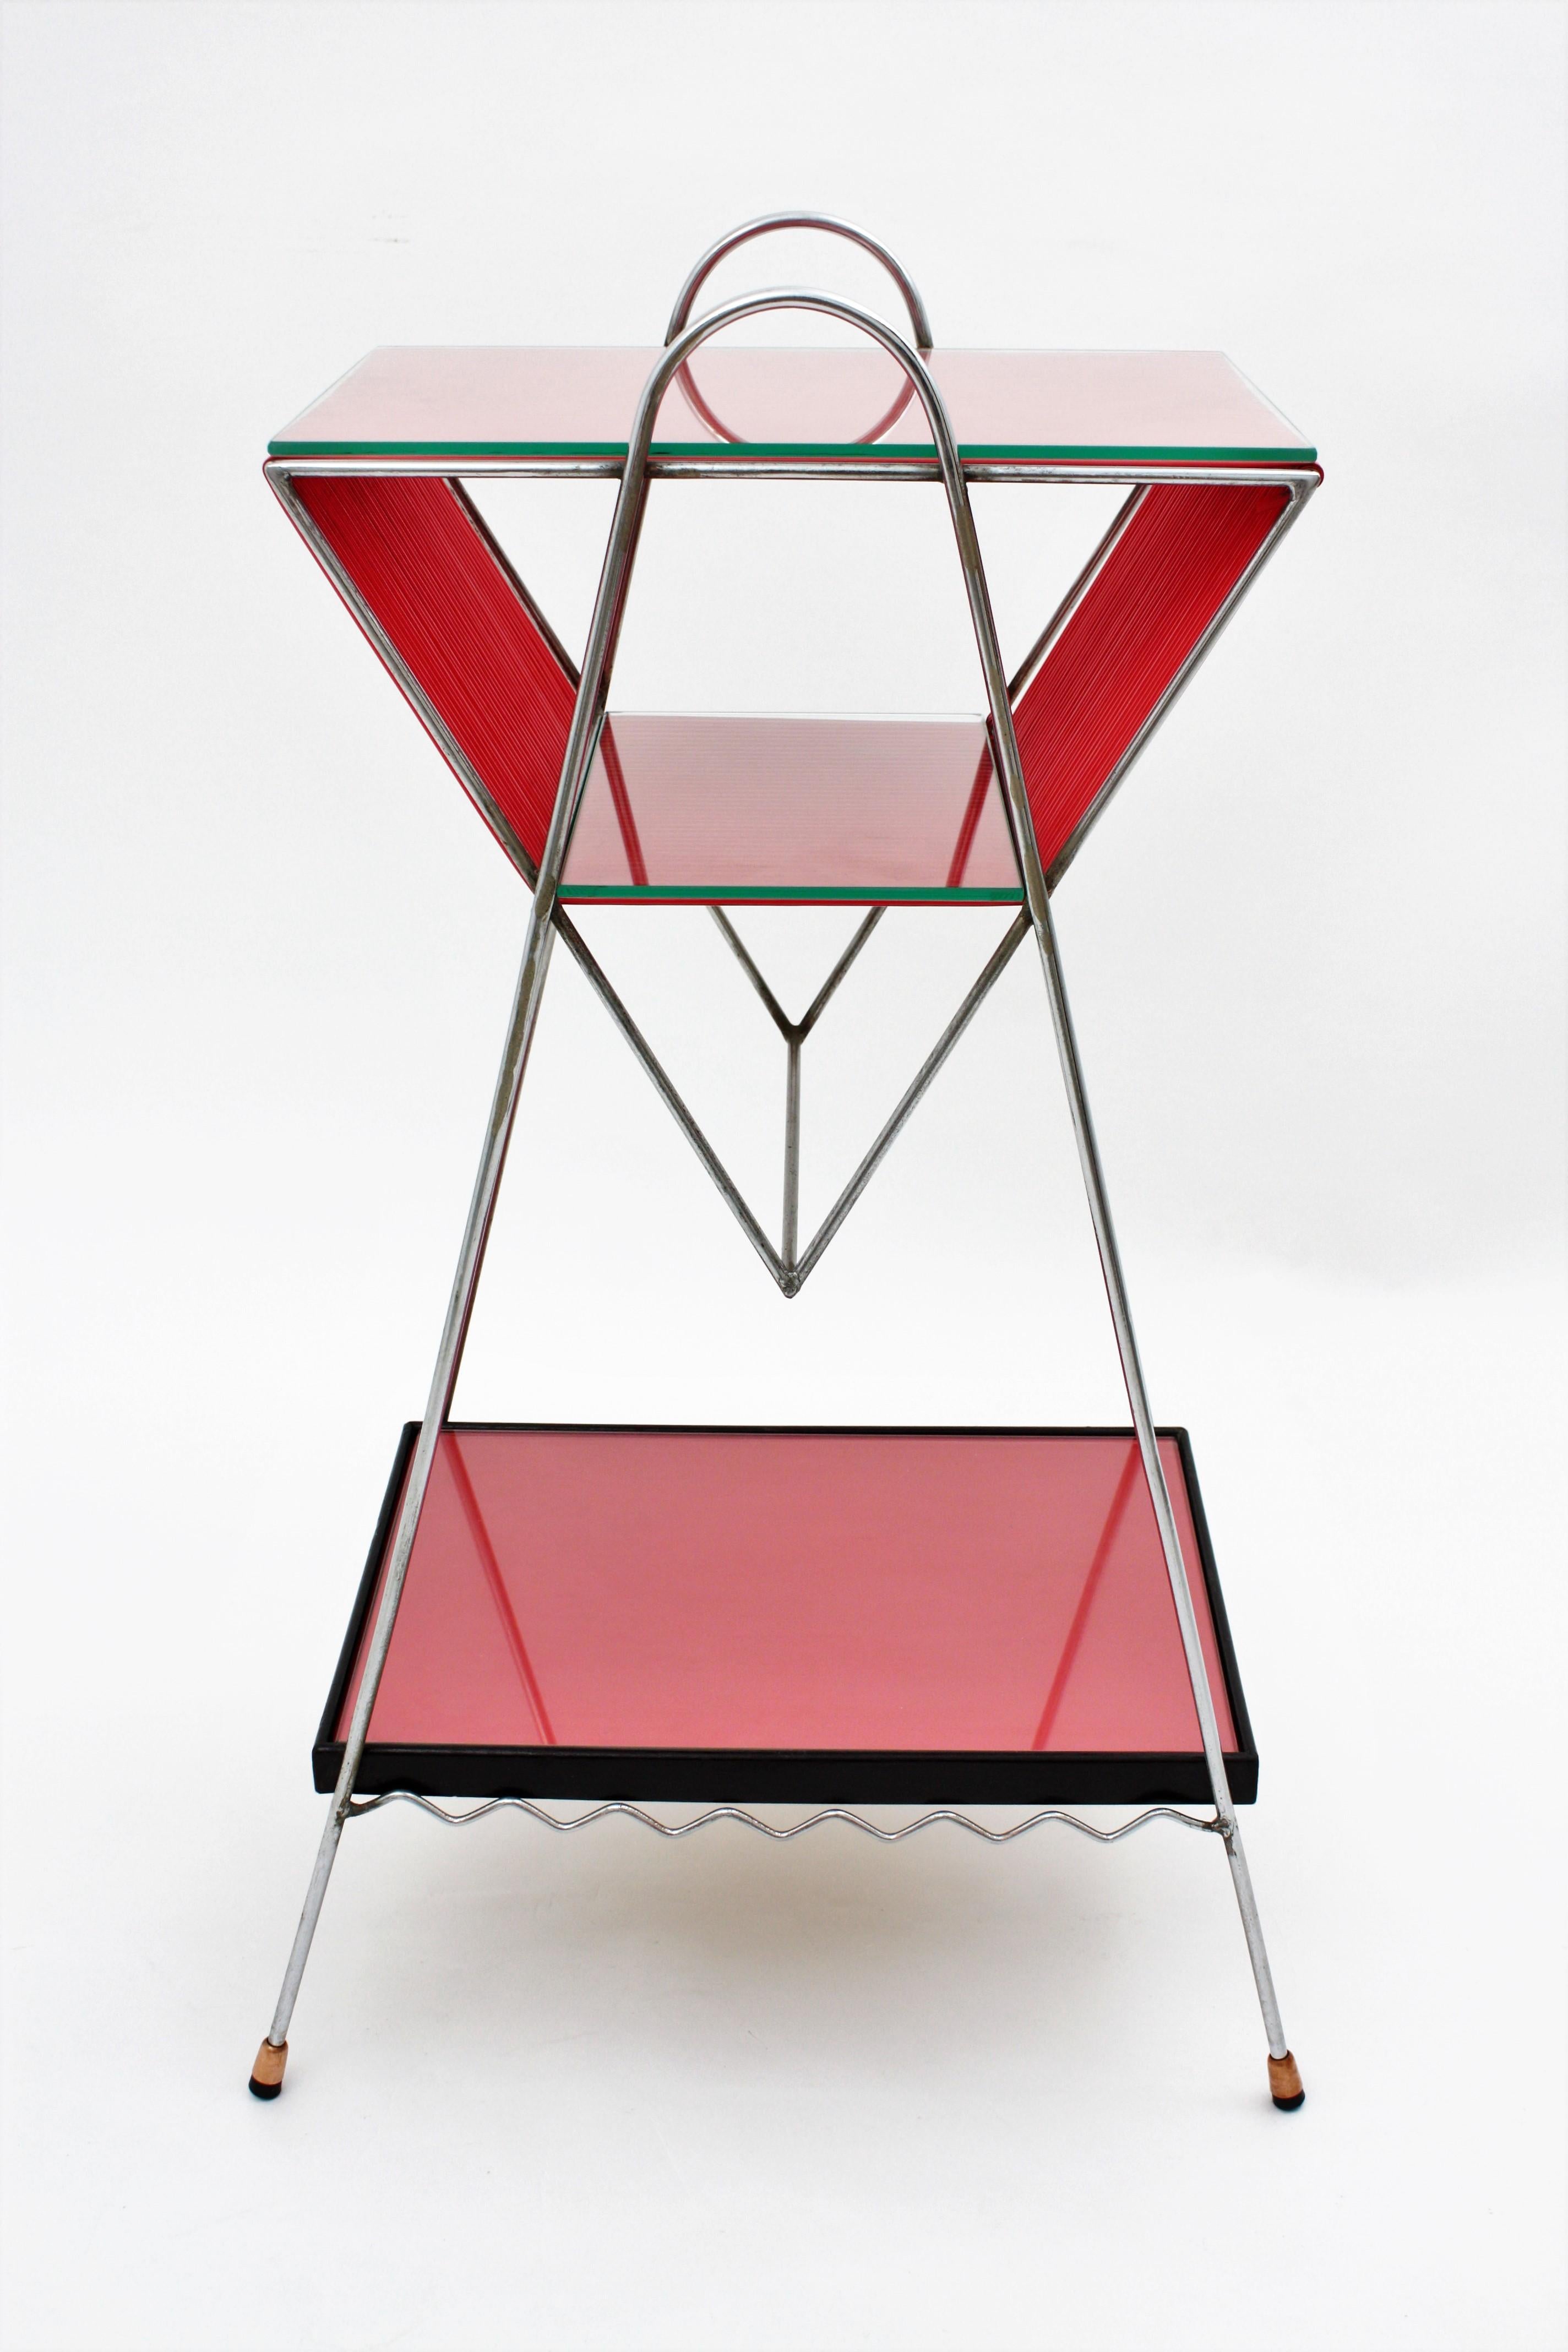 Mid-Century Modern side table or magazine rack with three levels. The structure is made of chromed iron. The lower tray is made of lacquered red and black wood, and the upper trays are made of red scoubidou or plastic thread. Its geometric design